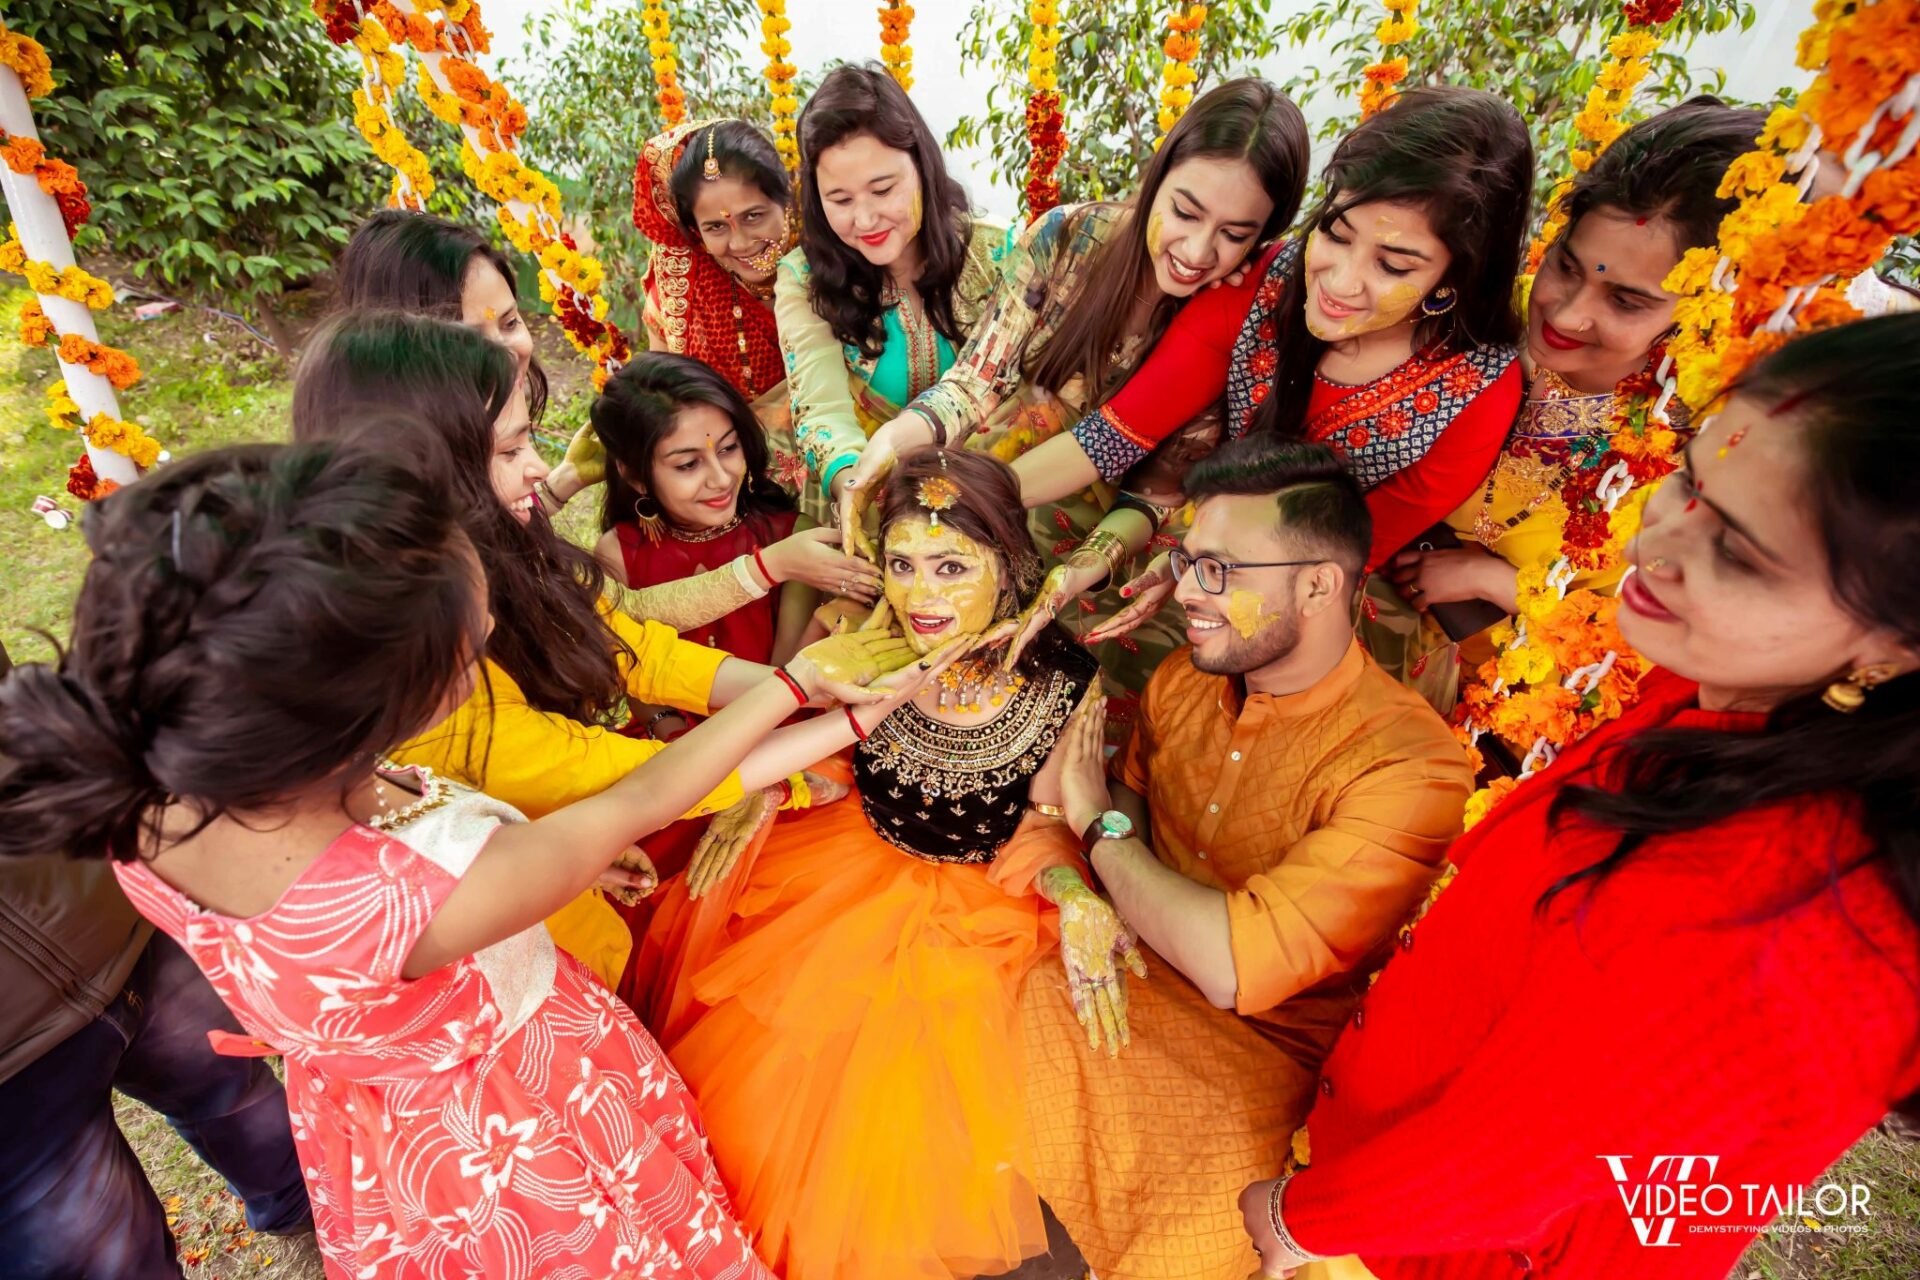 Significance of Haldi in Indian marriages | Times of India